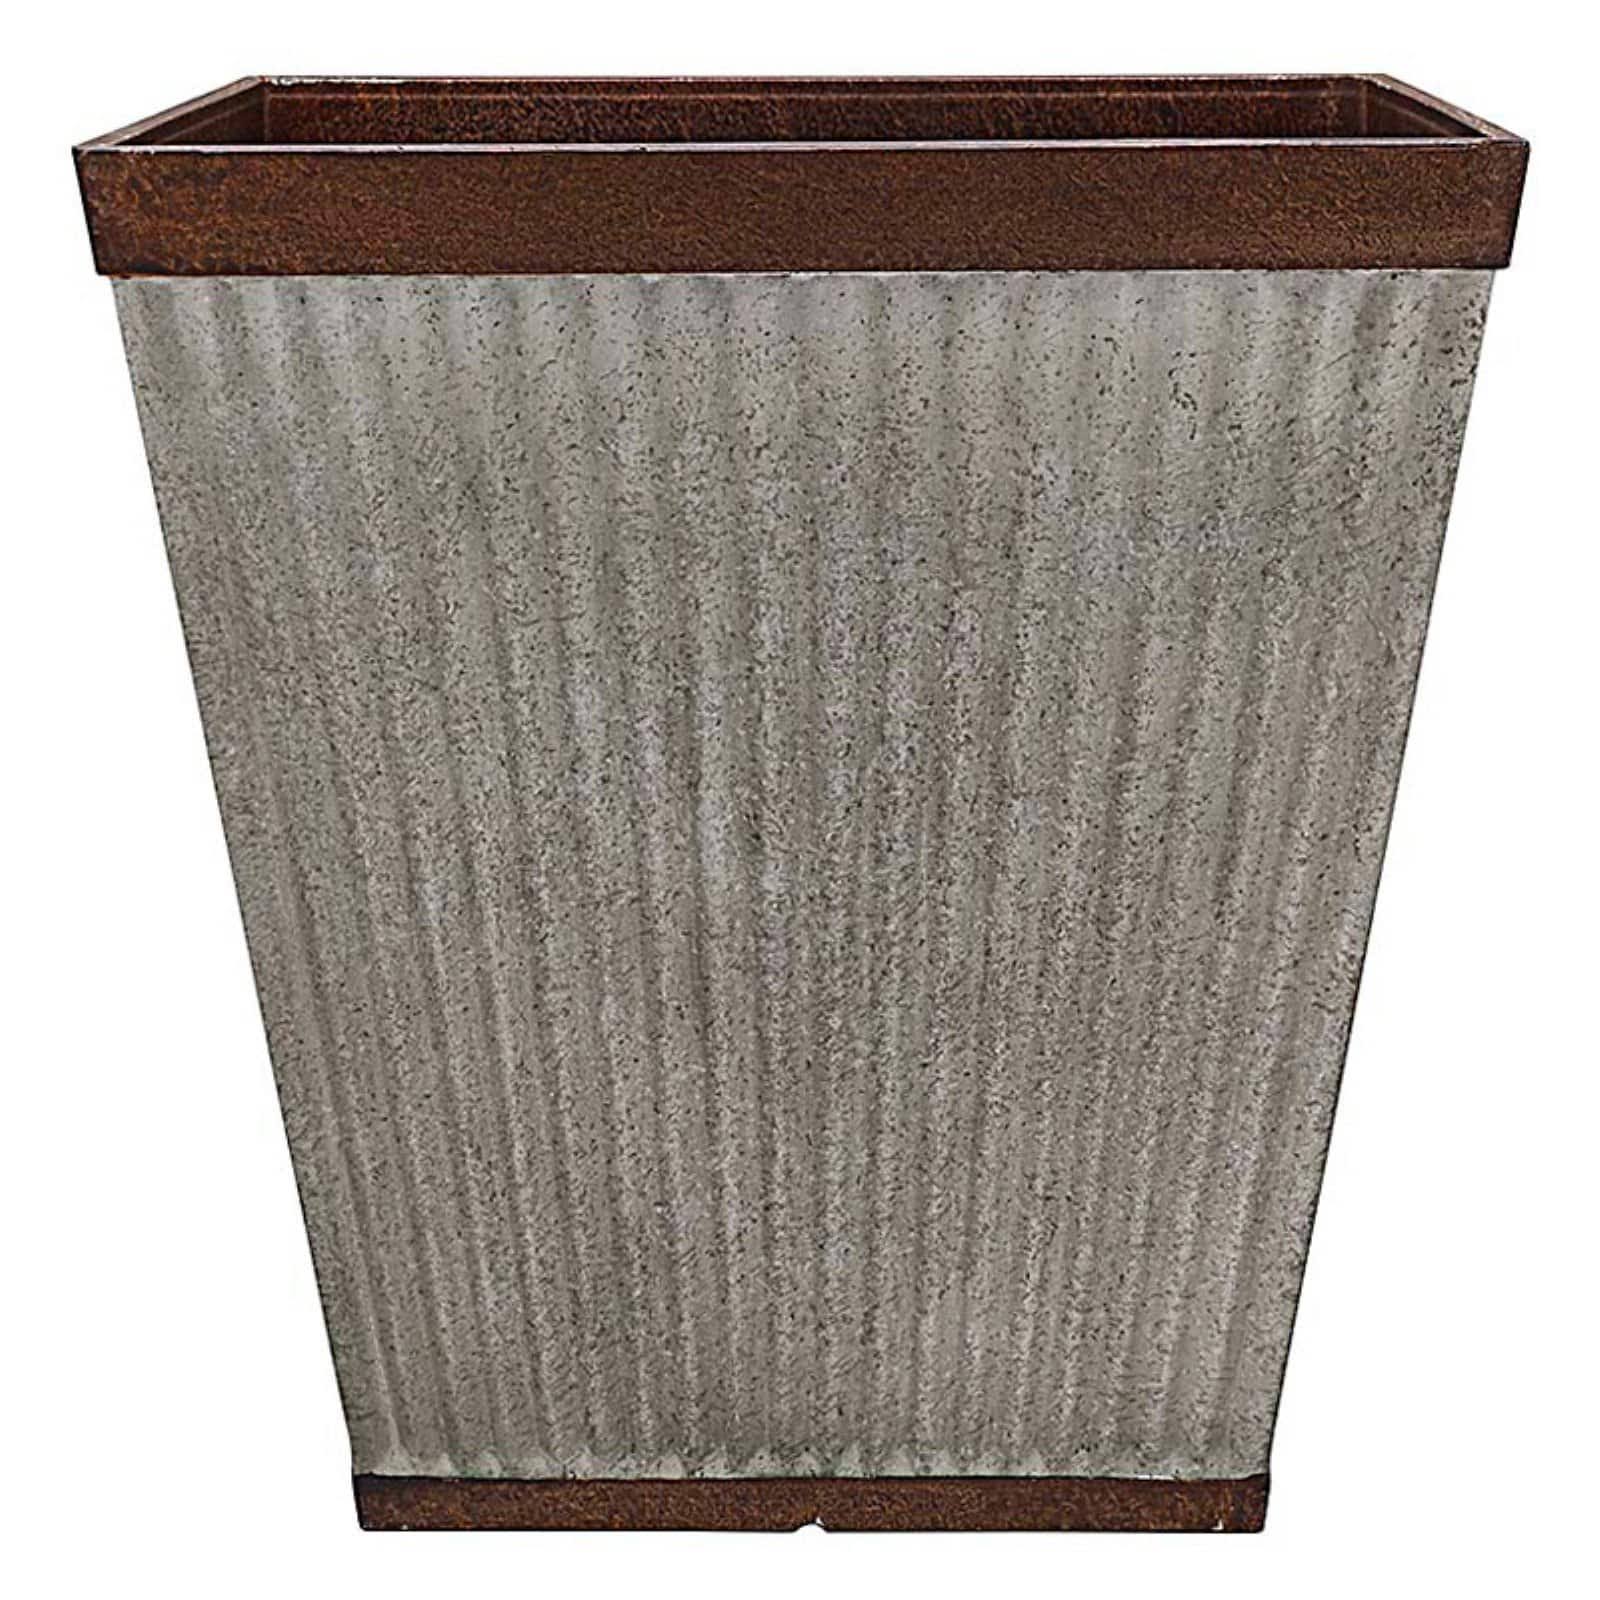 Southern Patio Westlake 16 in. x 16 in. Resin Rustic Galvanized Square Planter